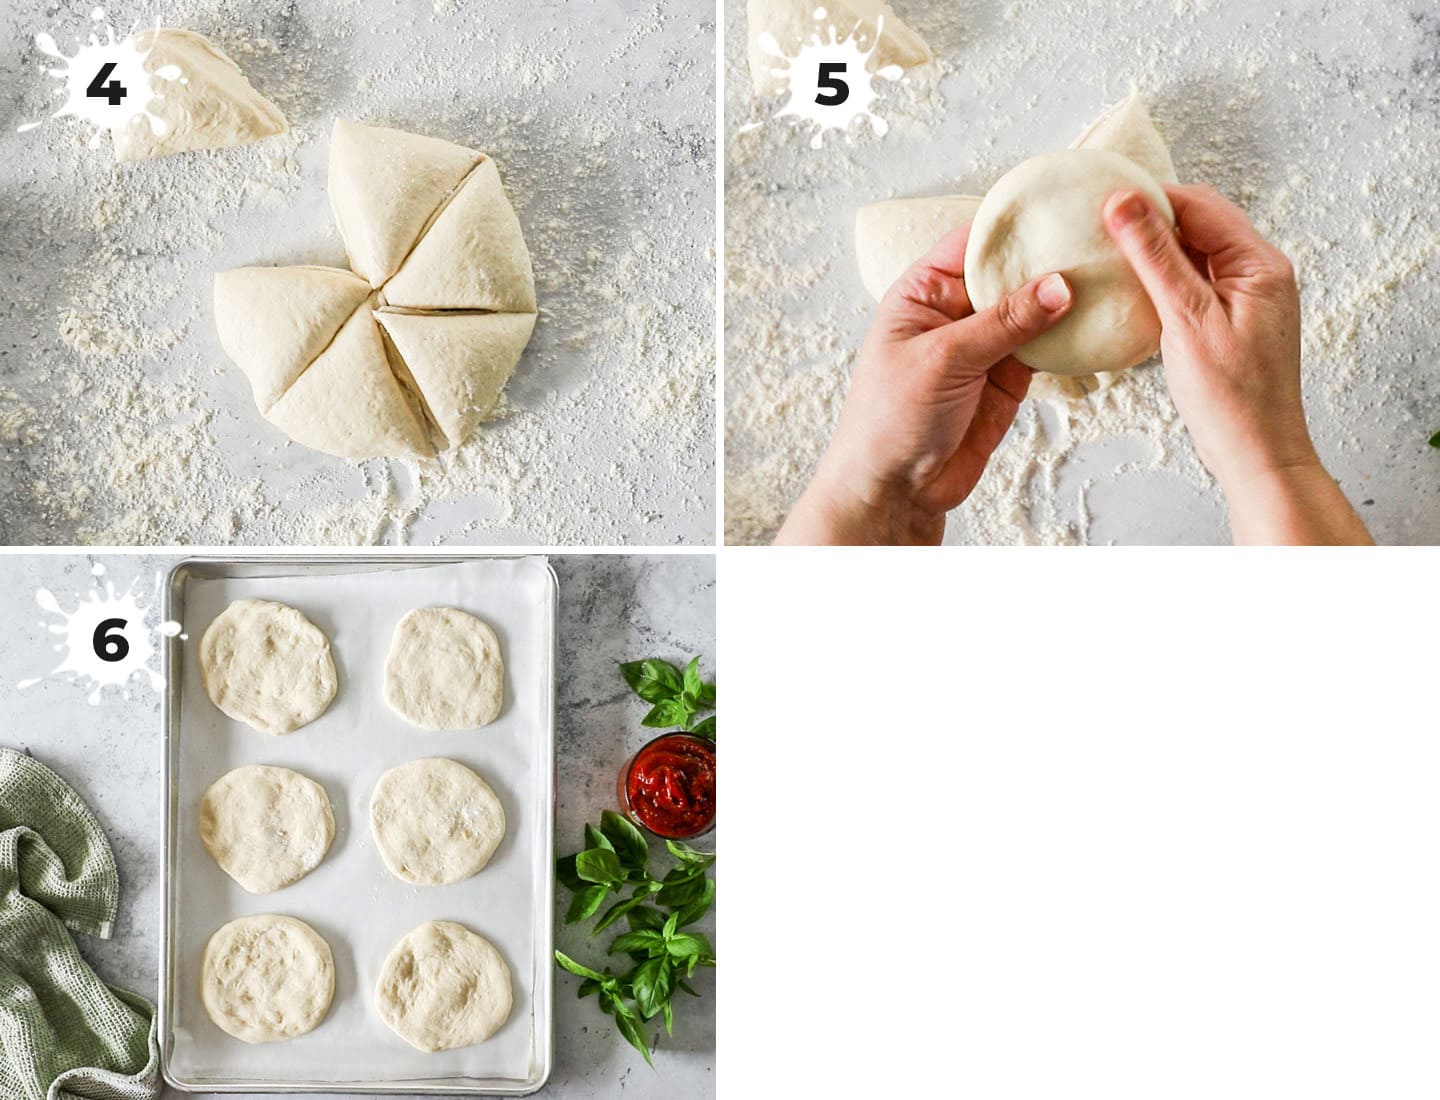 A collage showing how to shape the pizza dough.